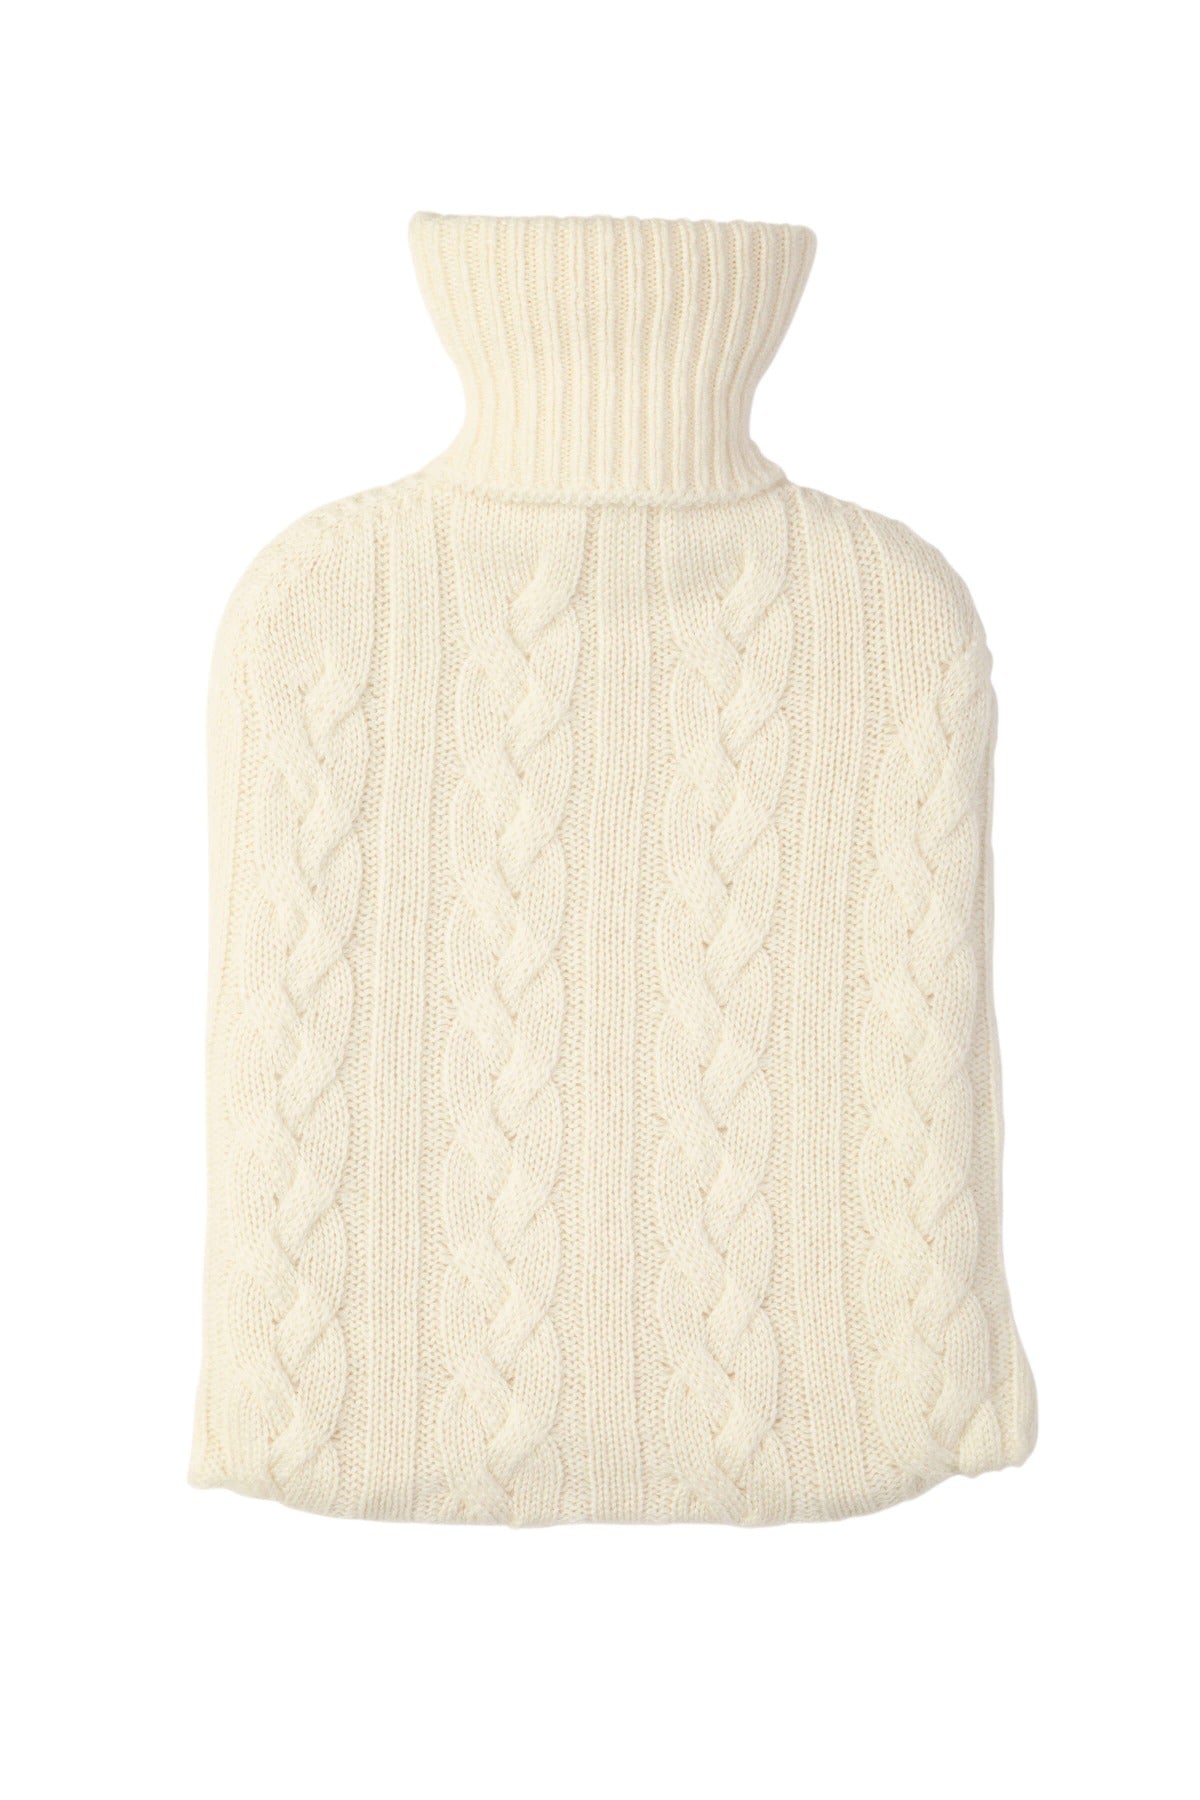 Johnstons of Elgin Cashmere Cable Hot Water Bottle Cover in Ecru White PA0000082276